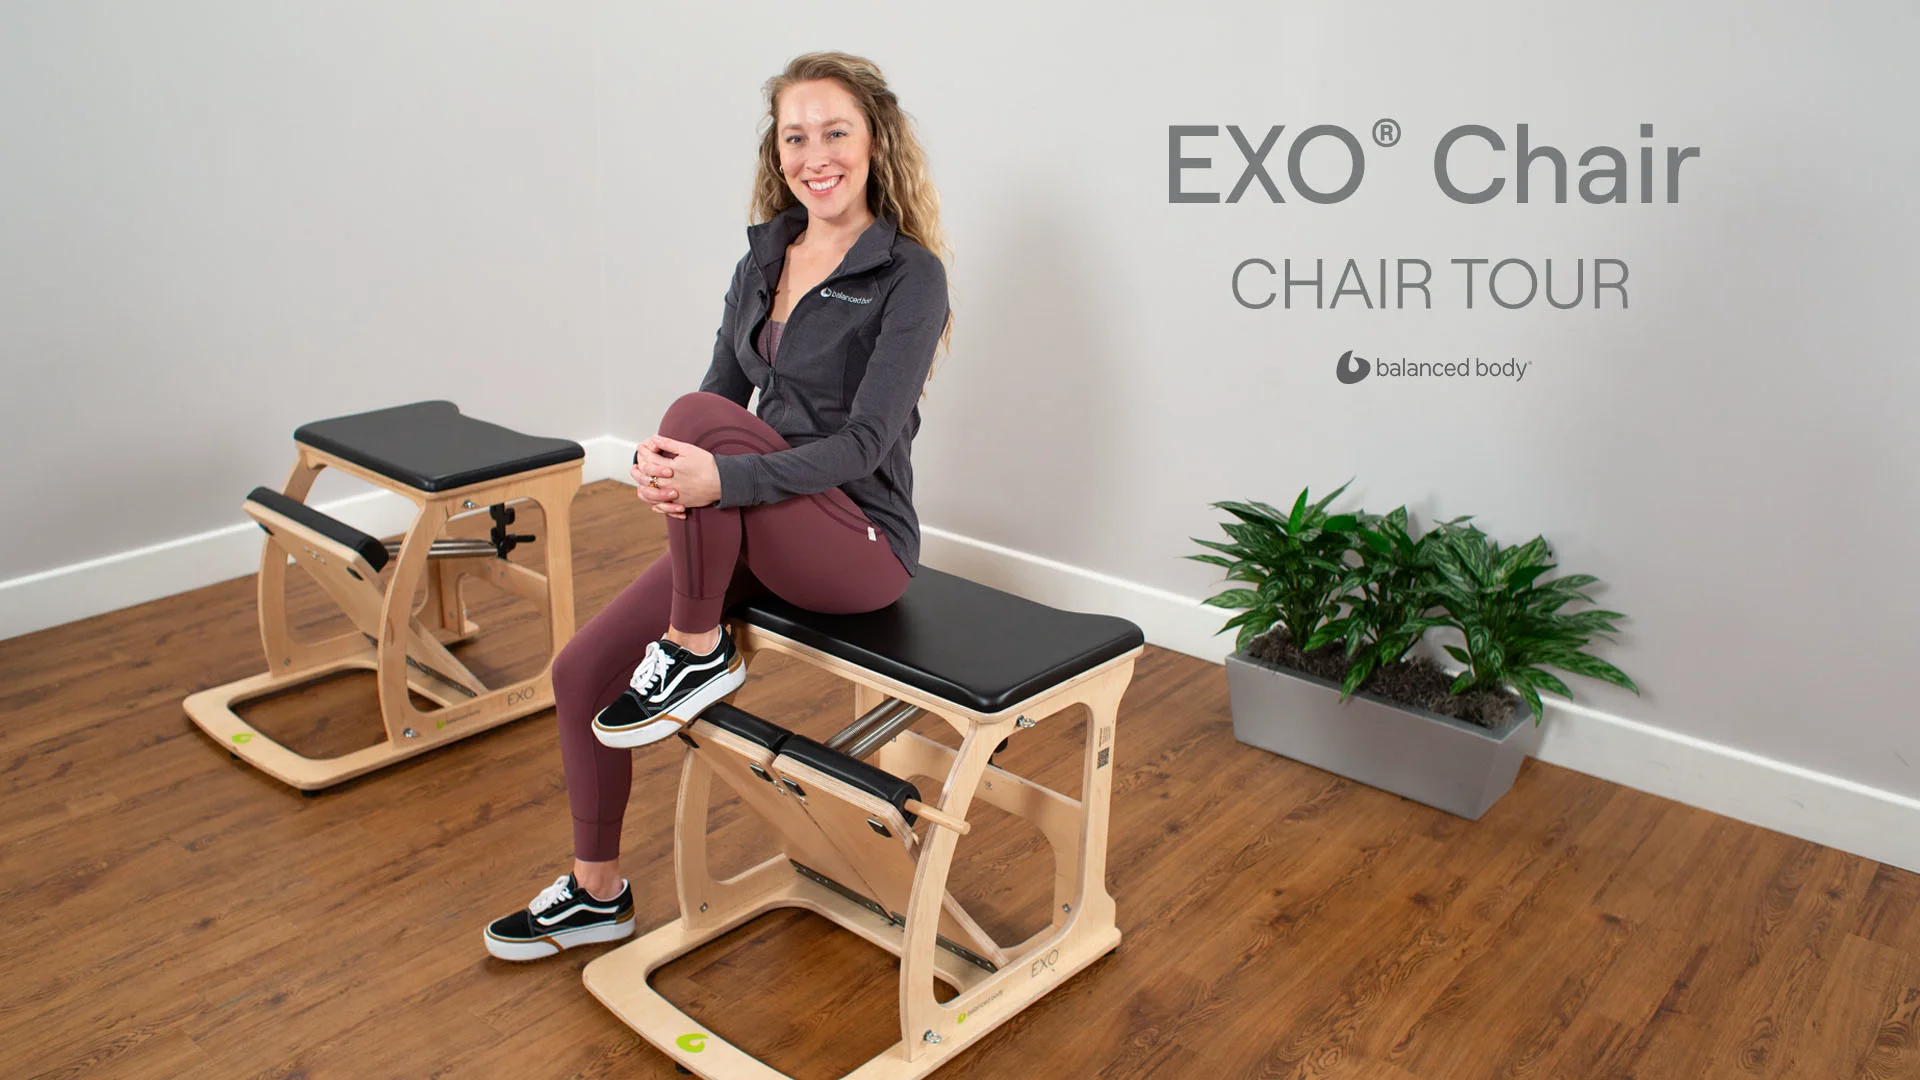 Pilates Chair Introduction: EXO® Chair on Vimeo